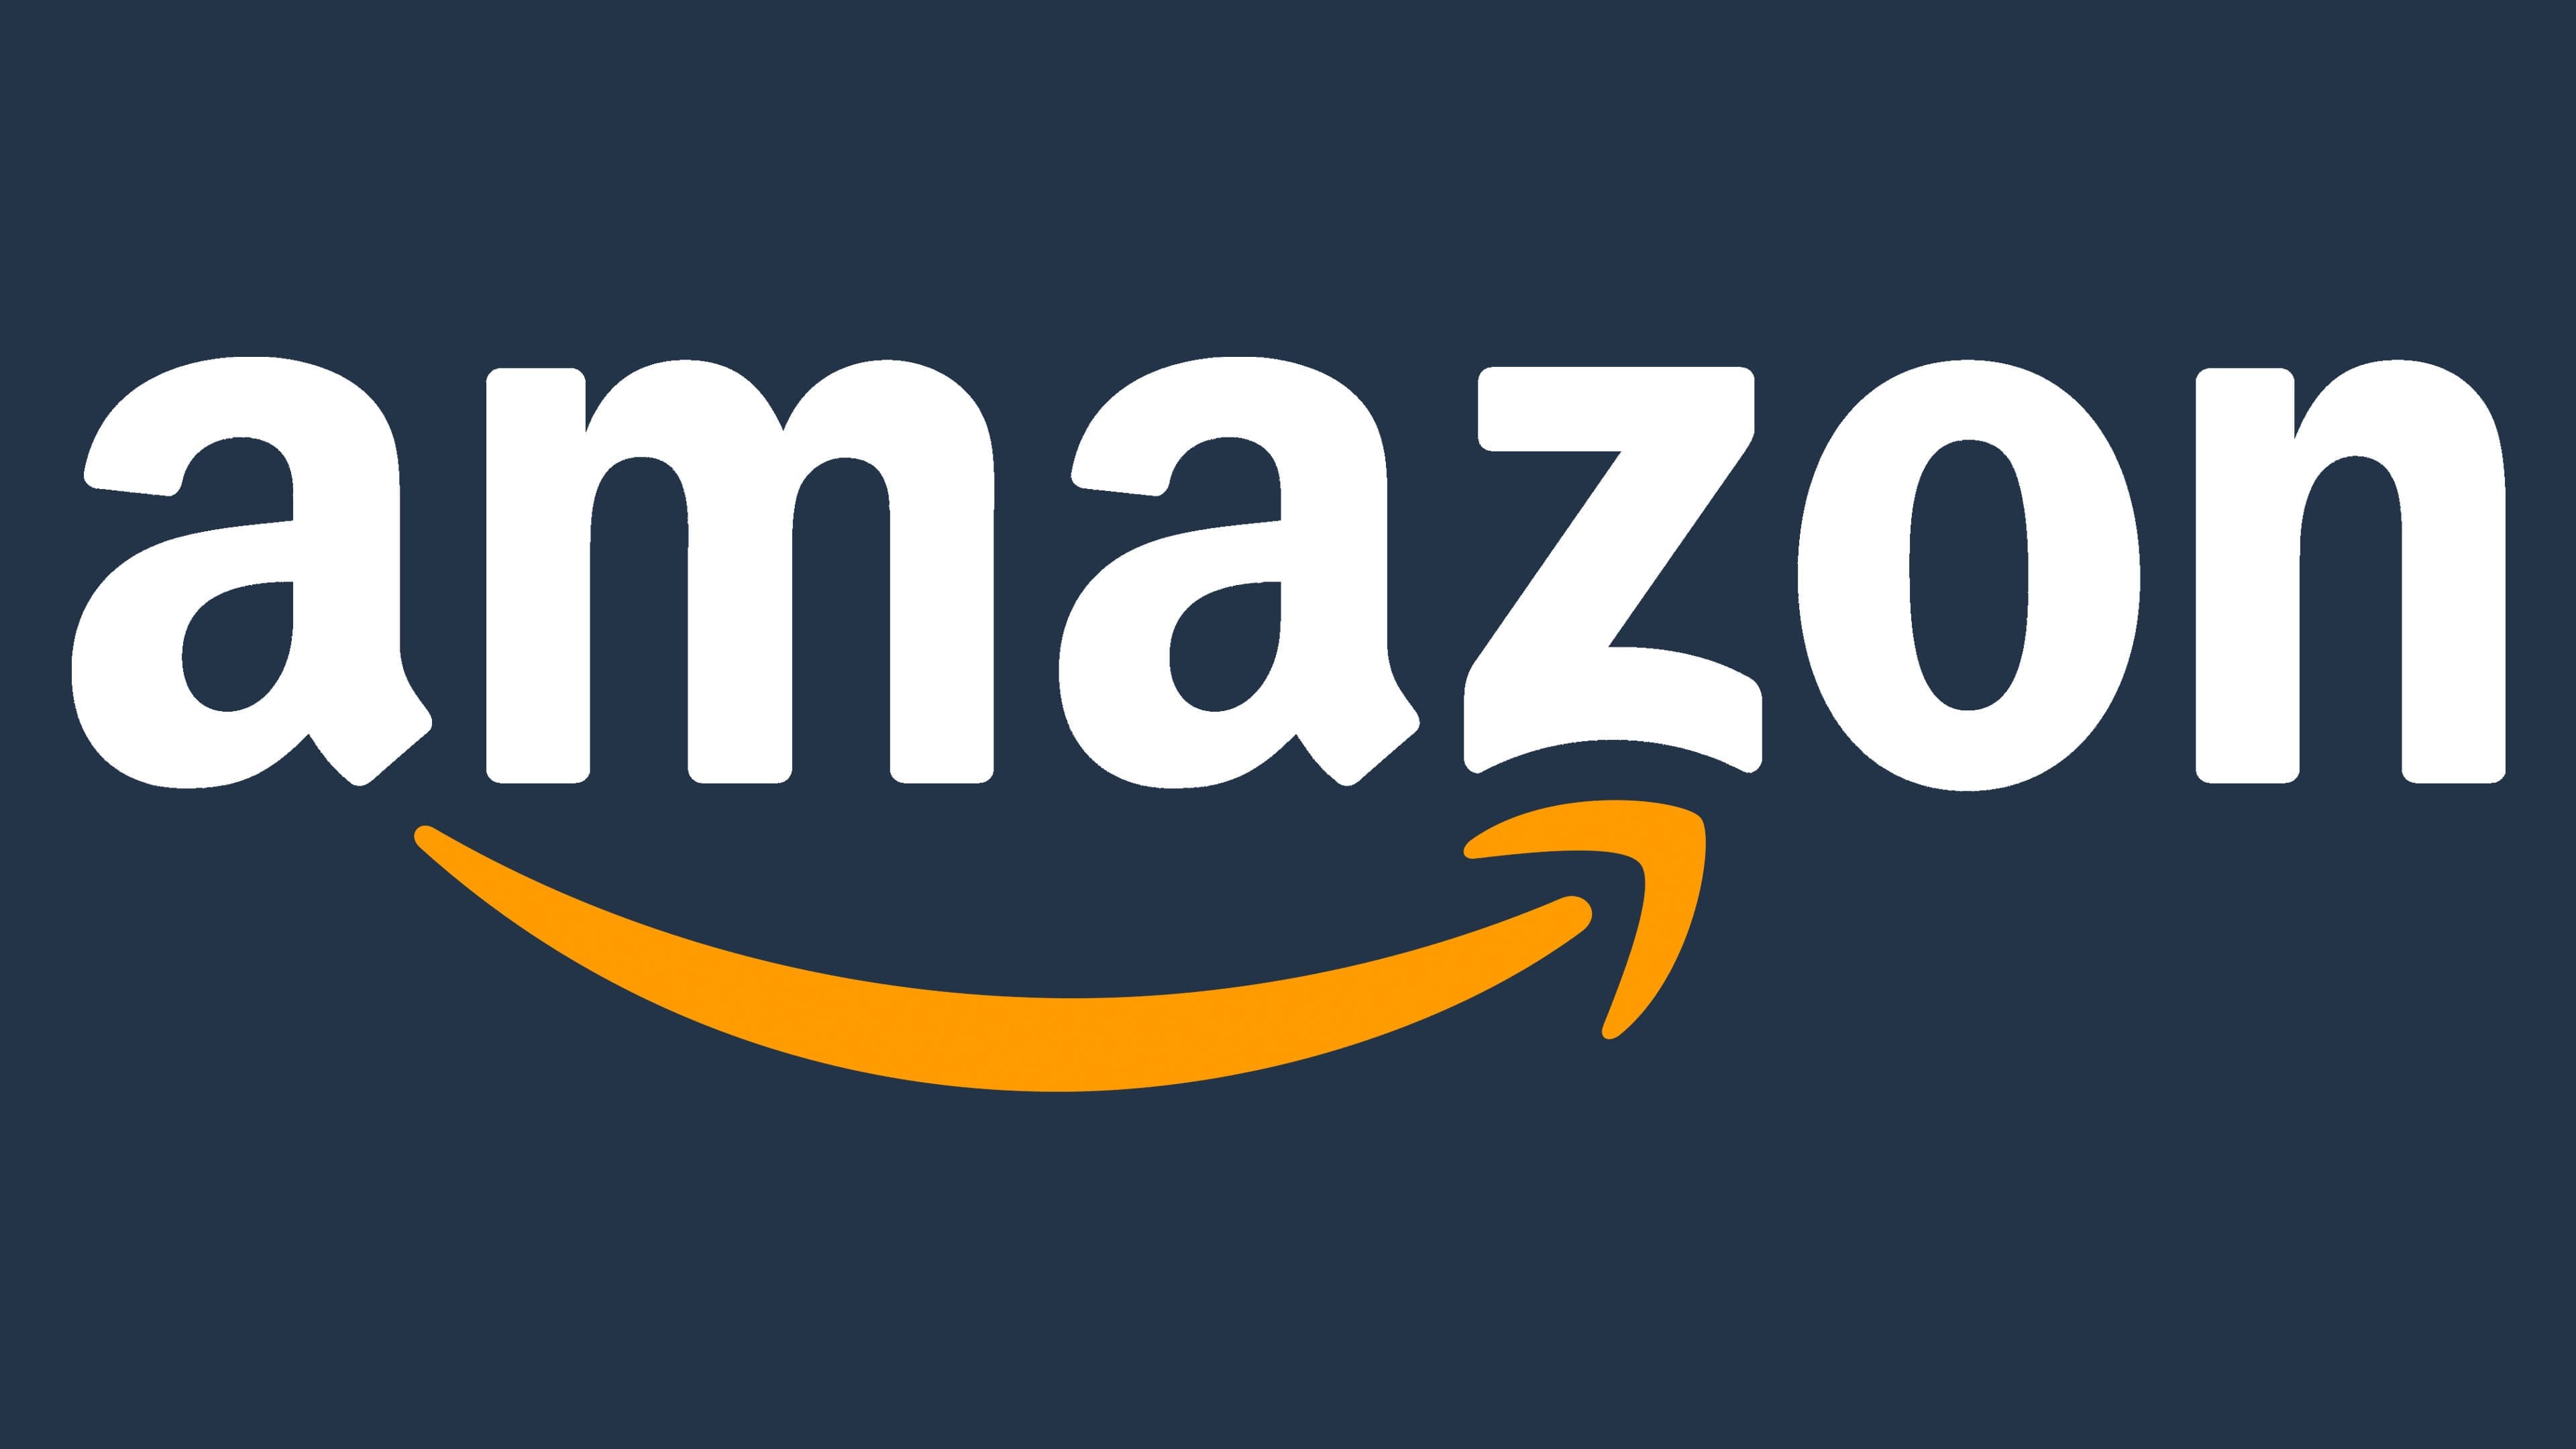 Image result for amazon logo